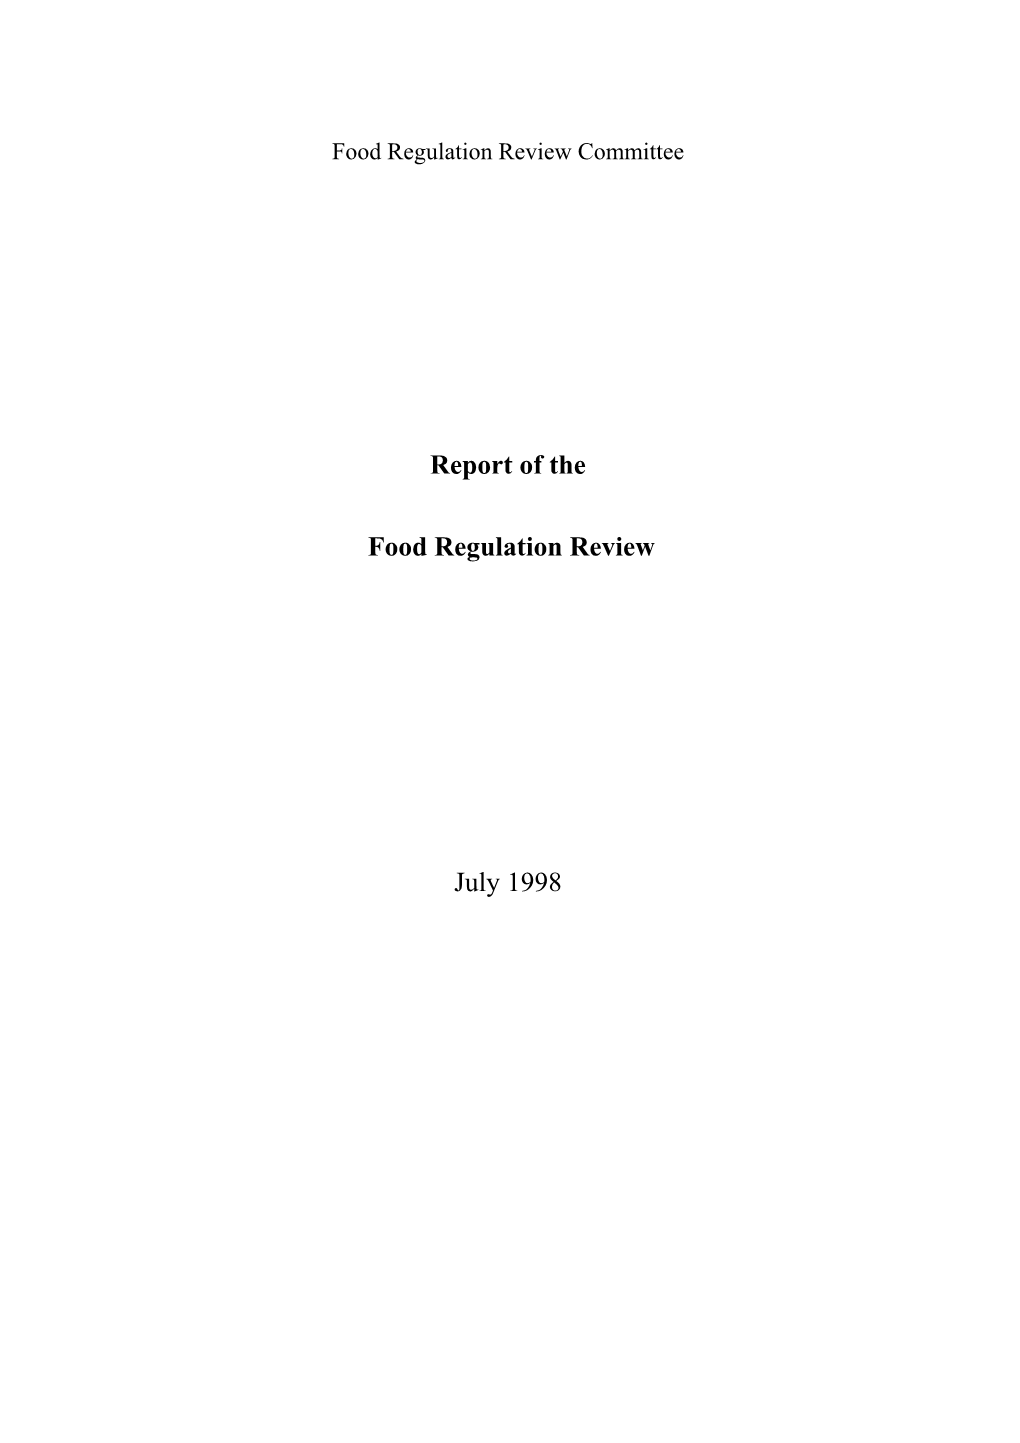 Report of the Food Regulation Review July 1998